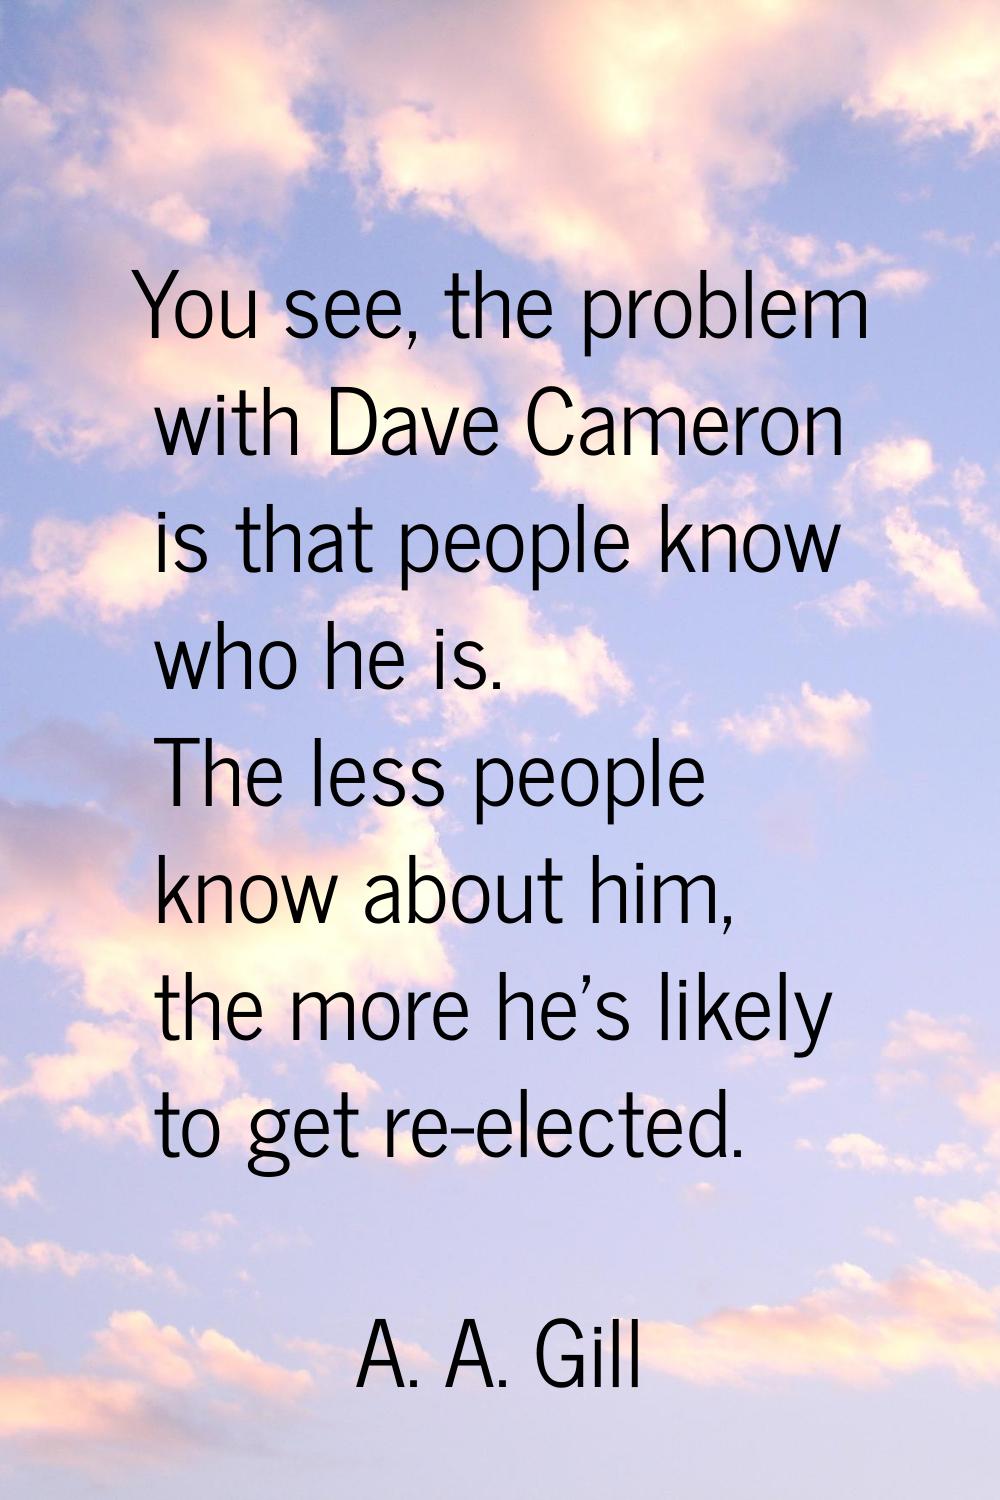 You see, the problem with Dave Cameron is that people know who he is. The less people know about hi